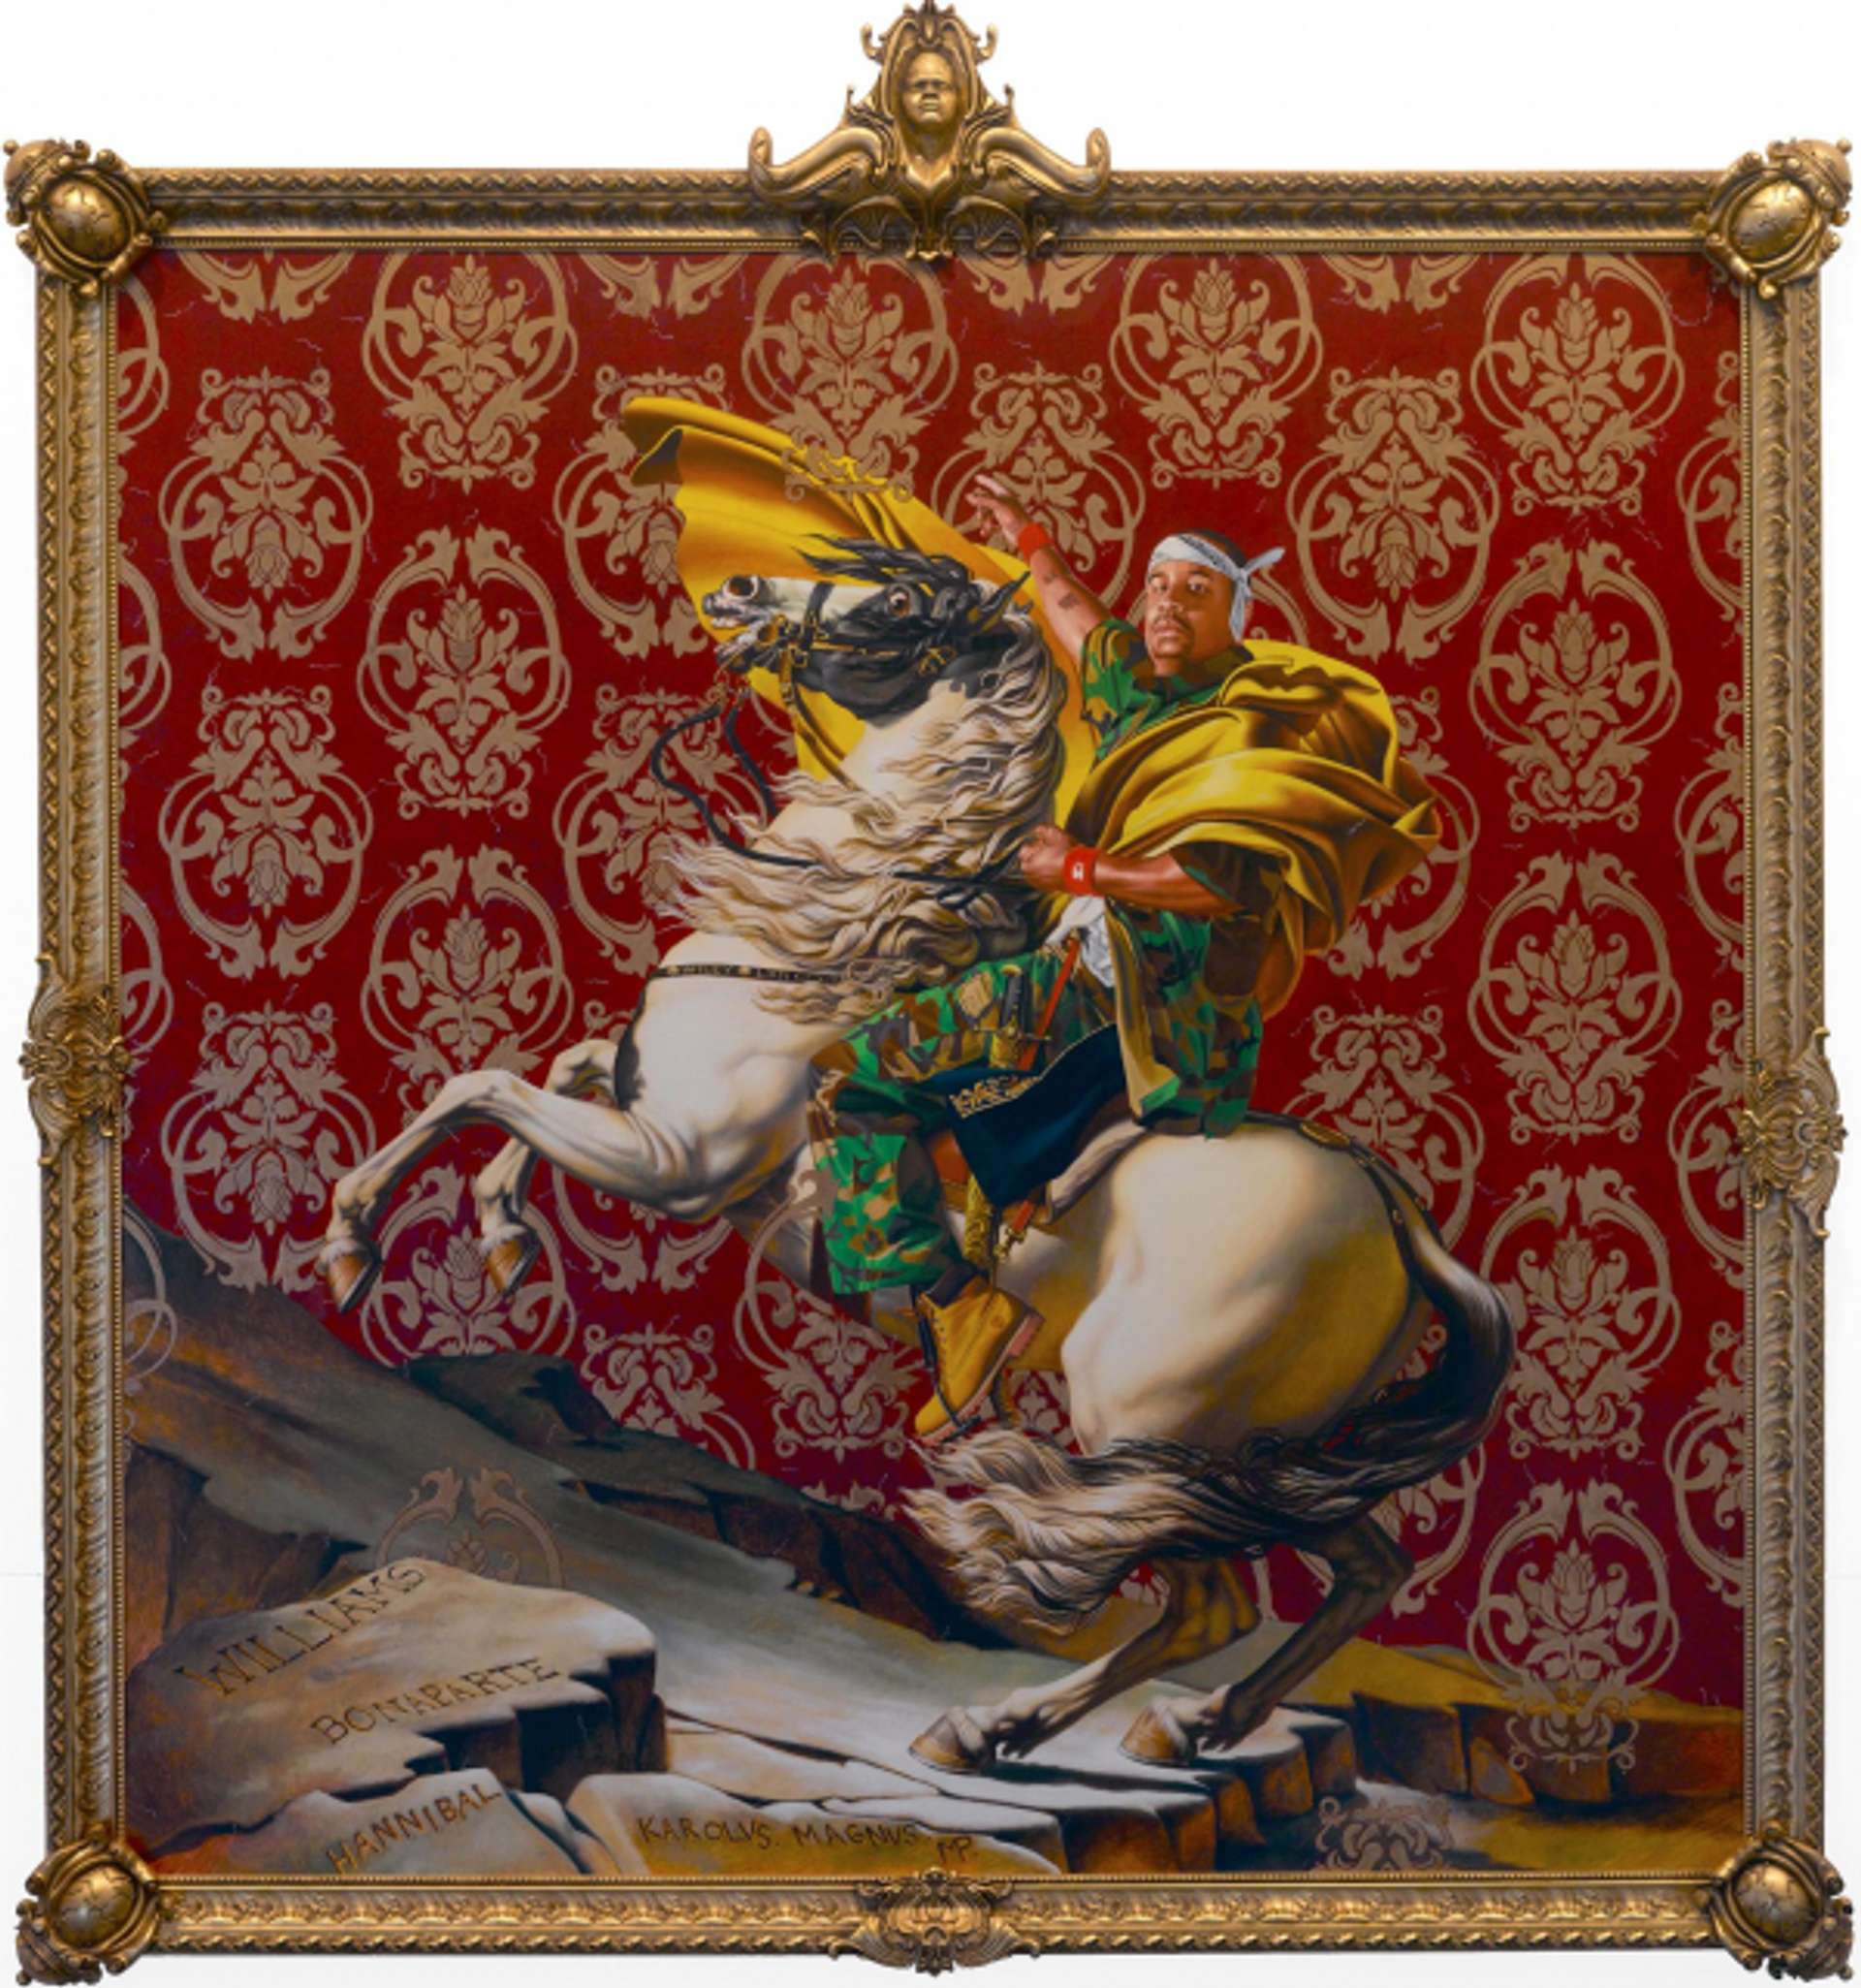 Kehinde Wiley’s Napoleon Leading The Army Over The Alps. A man riding a horse pointing forward against a red, decorative background